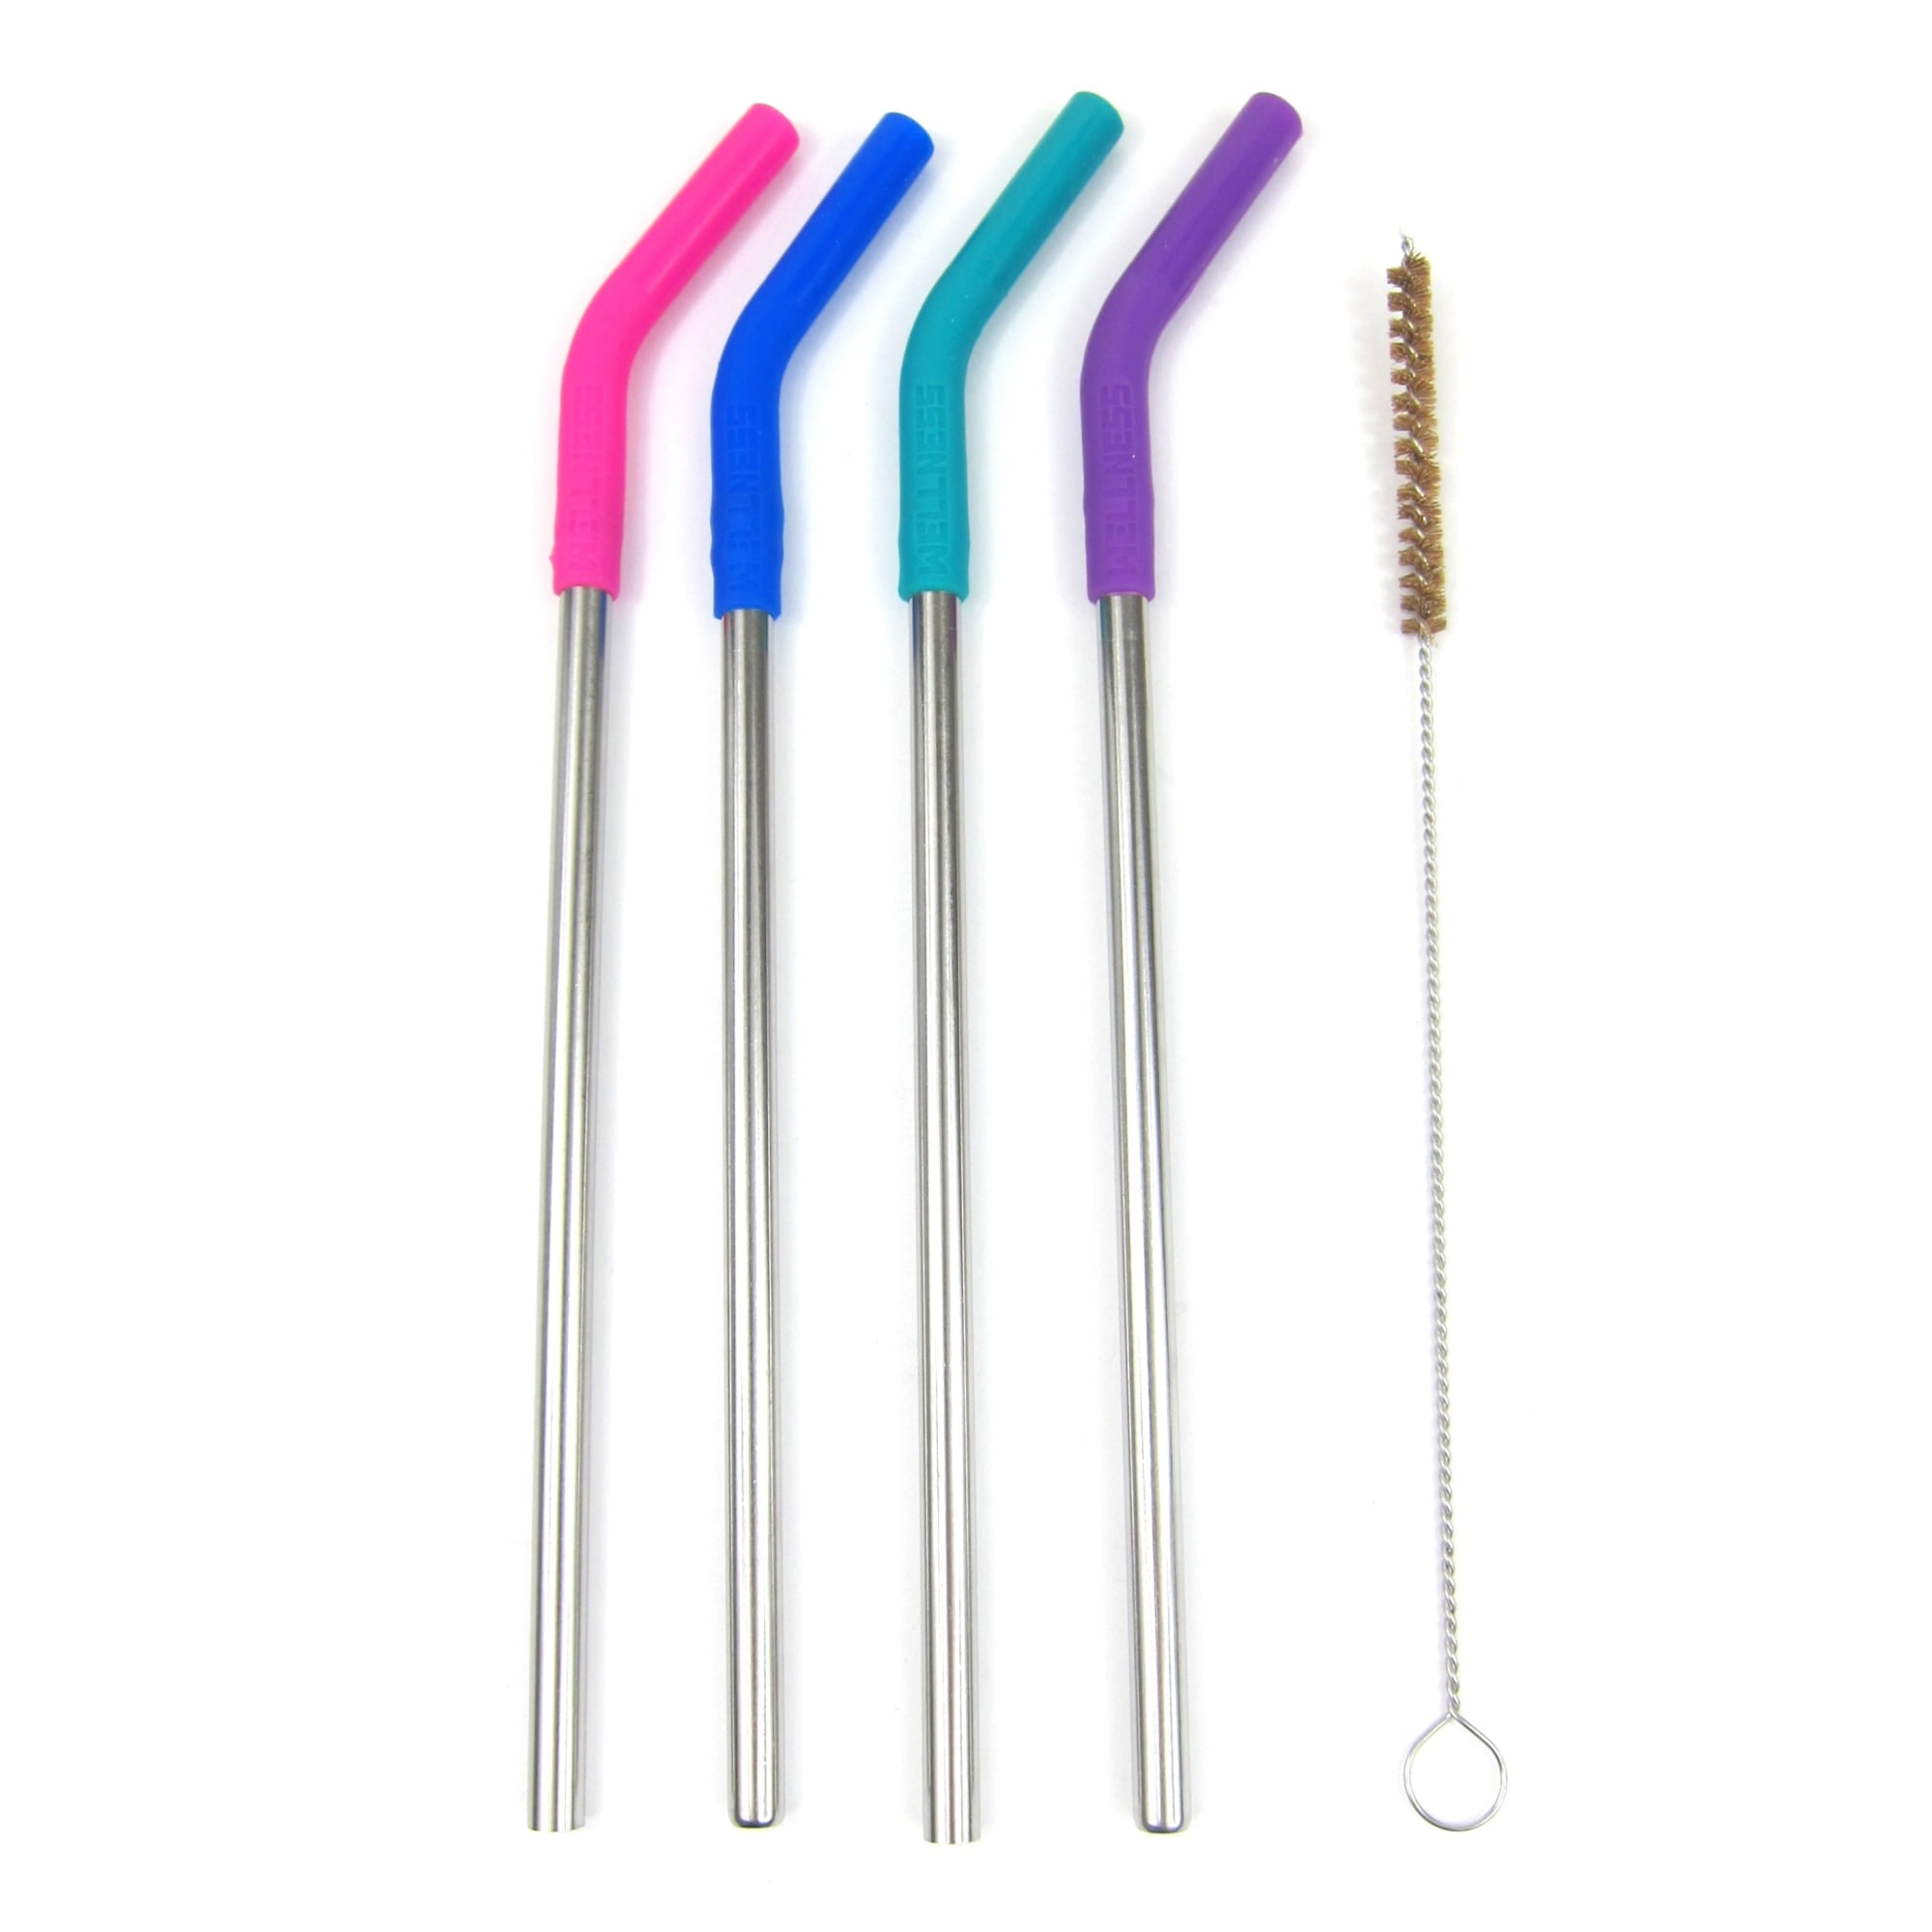 Stainless Steel Assorted Eco Friendly Reusable Metal Drinking Straws & Brushes